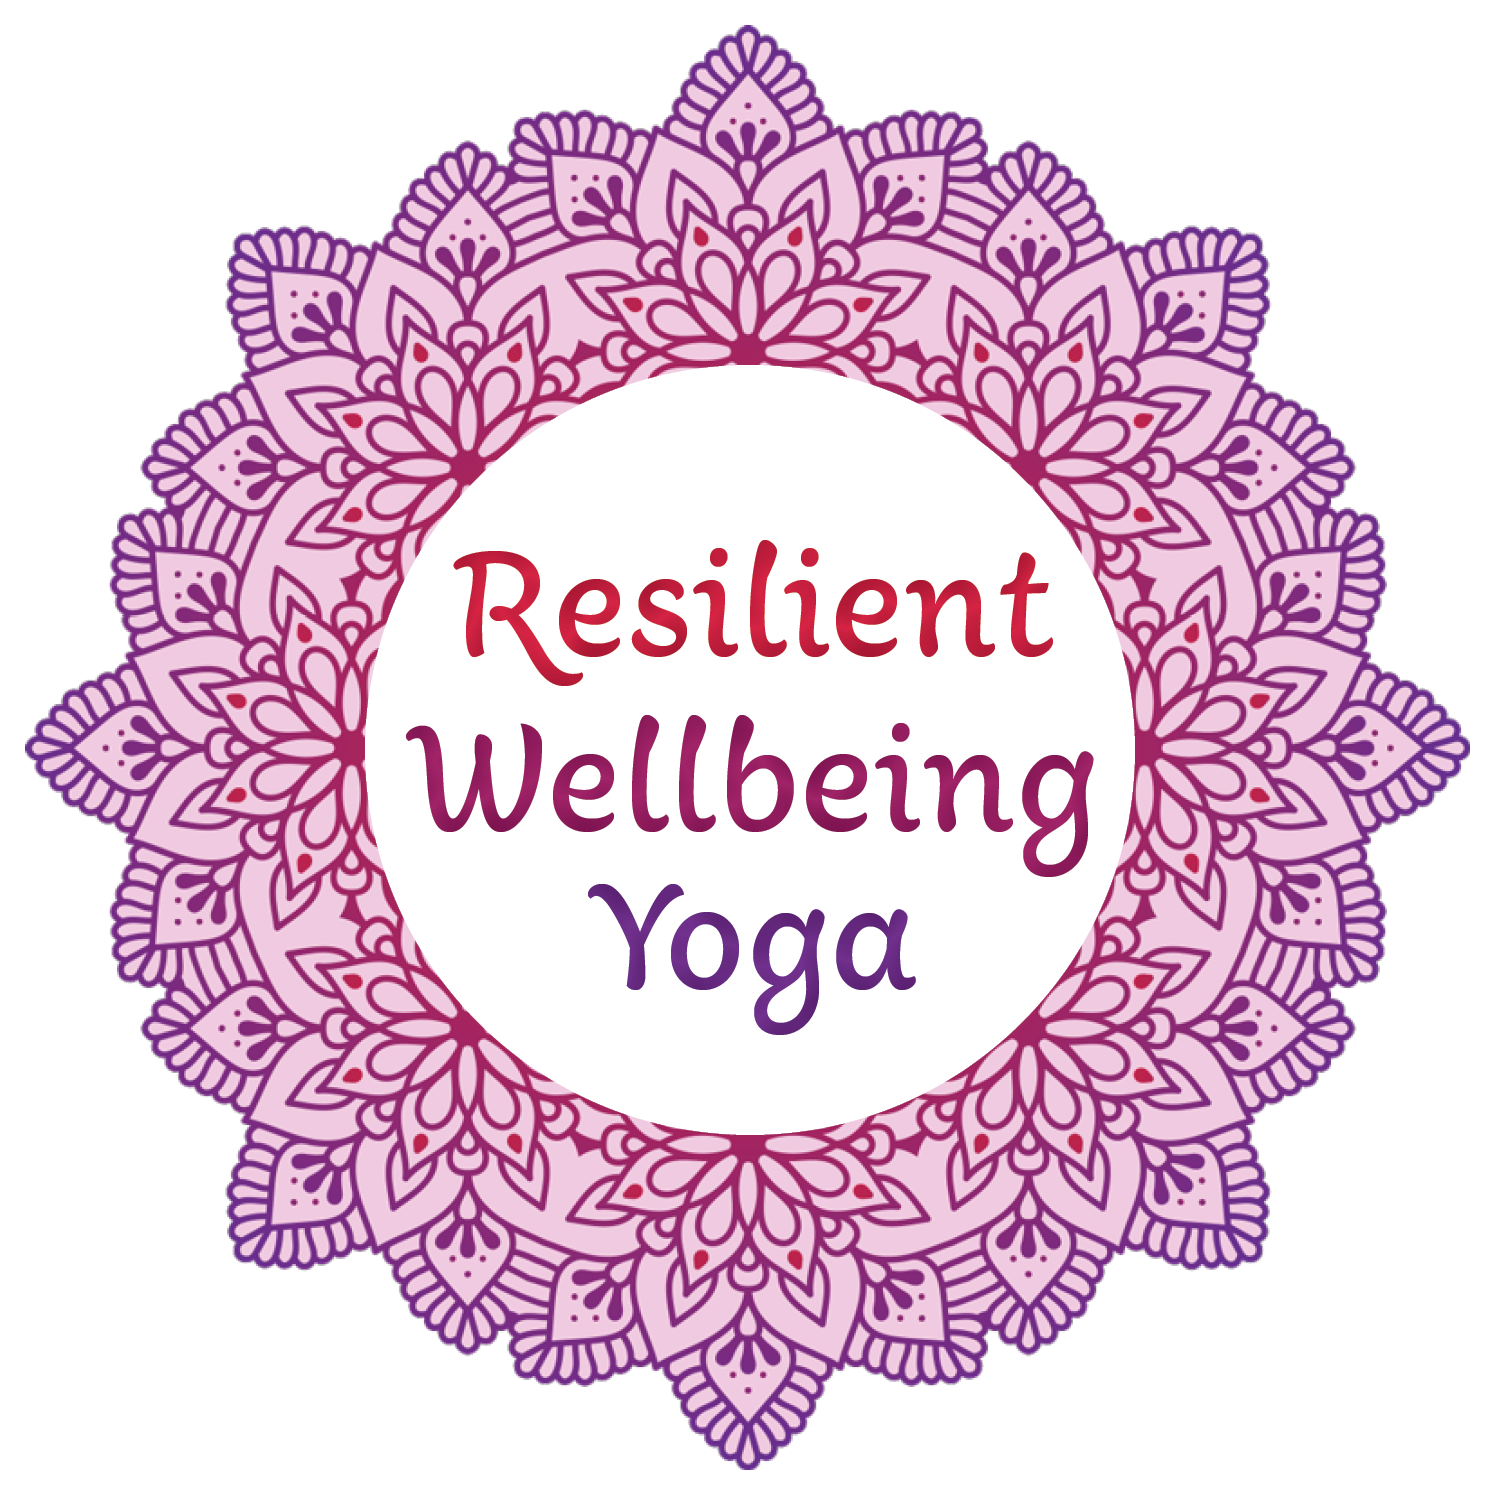 Resilient Wellbeing Yoga